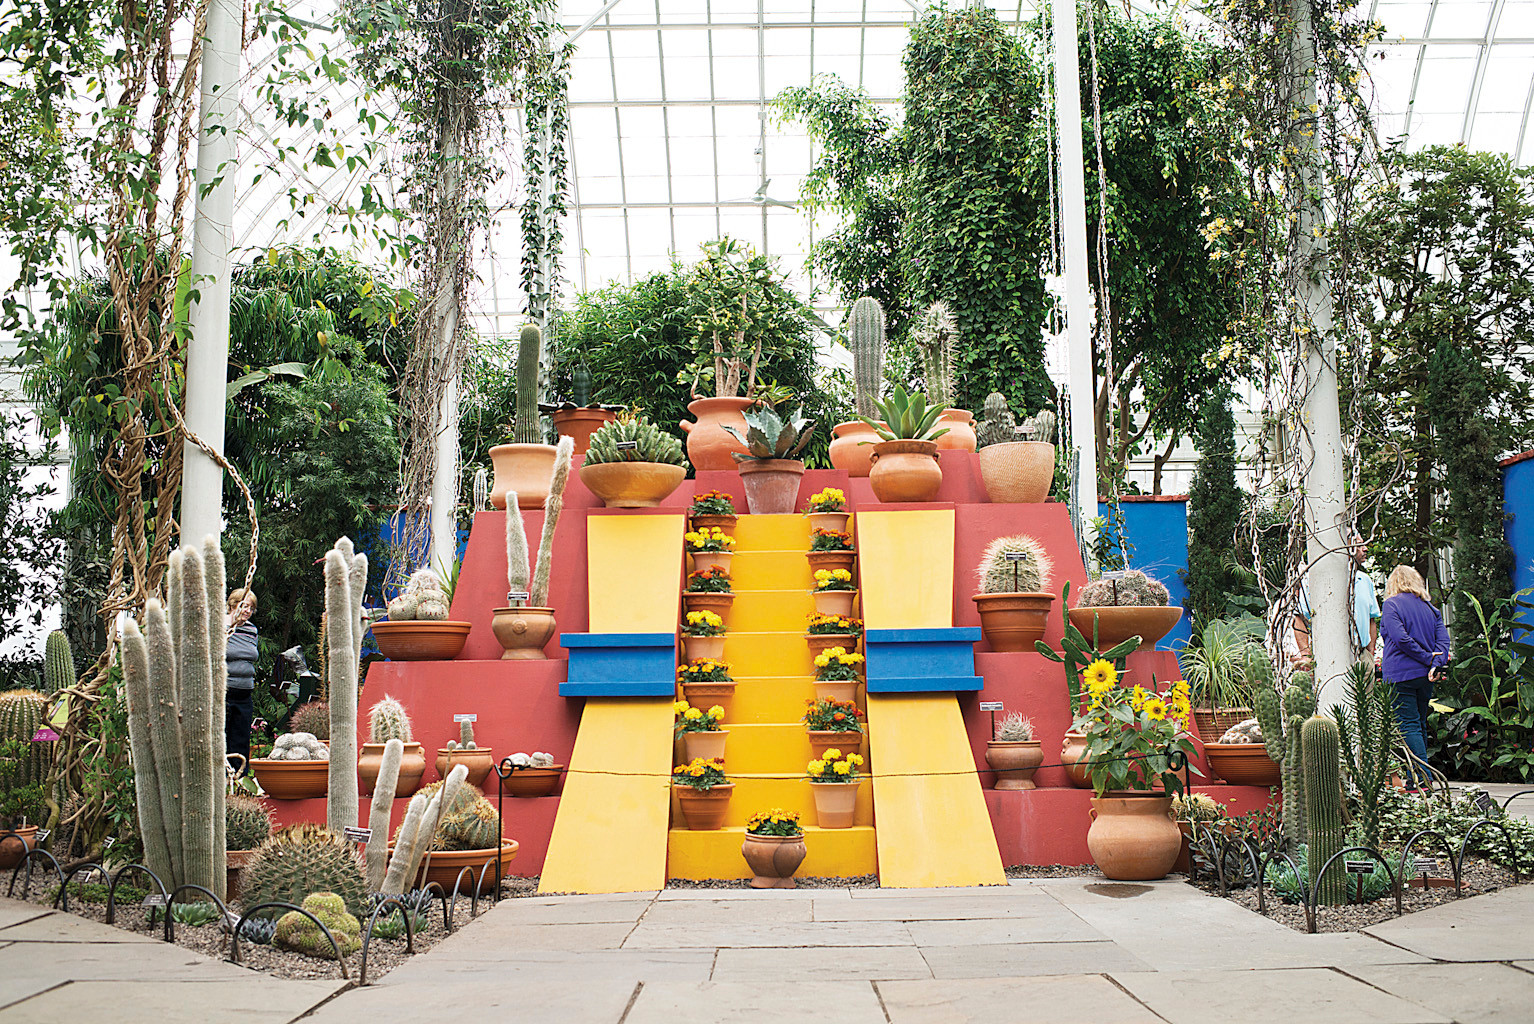 A large pyramid for plants and artwork to sit, similar to what Frida Kahlo had in her Mexico City home, 'Casa Azul.'